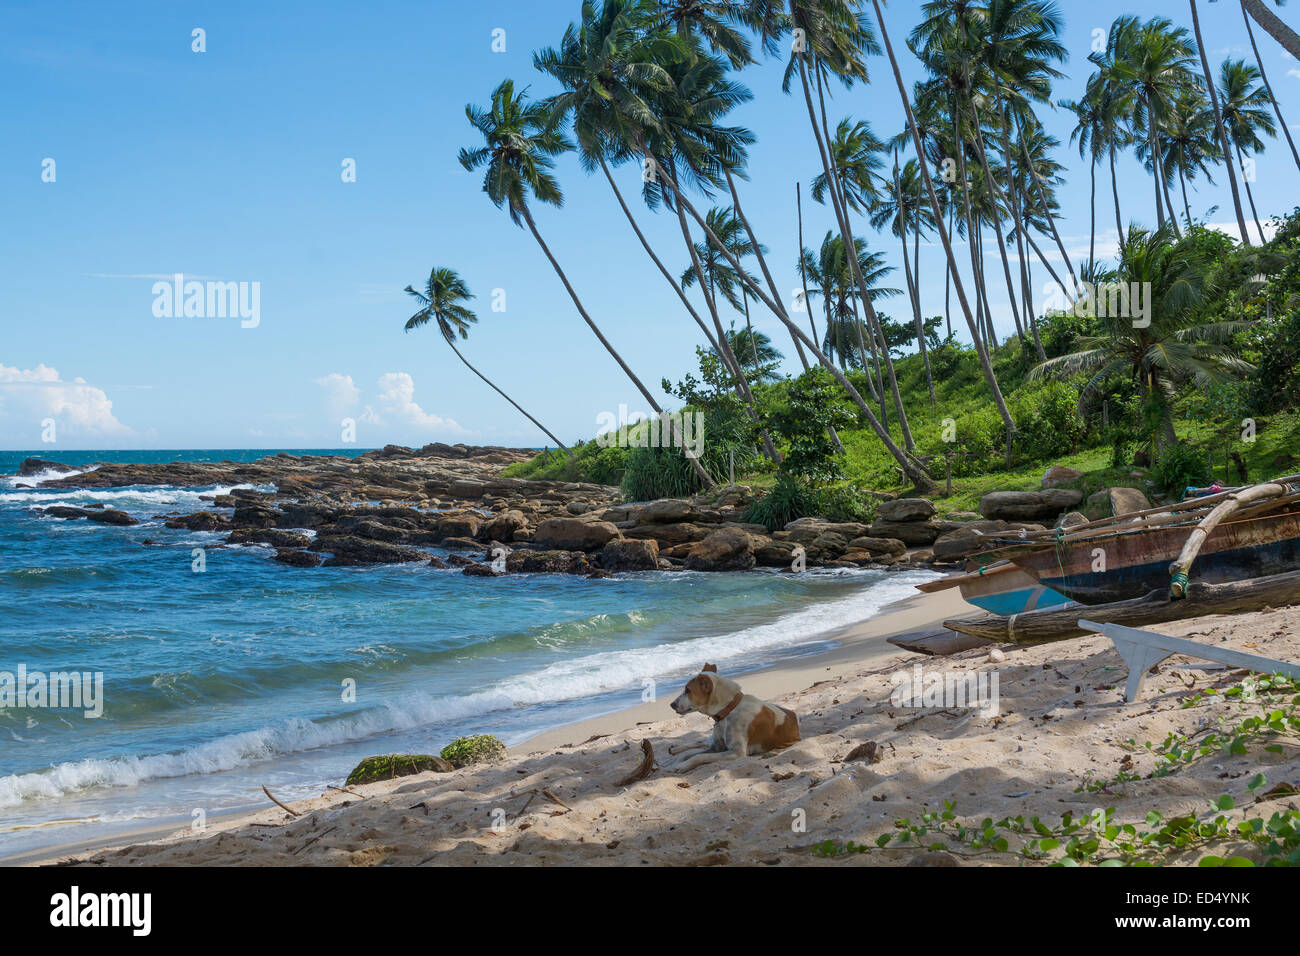 Dog resting on tropical rocky beach with coconut palm trees and fishing boats. Tangalle, Southern Province, Sri Lanka, Asia. Stock Photo